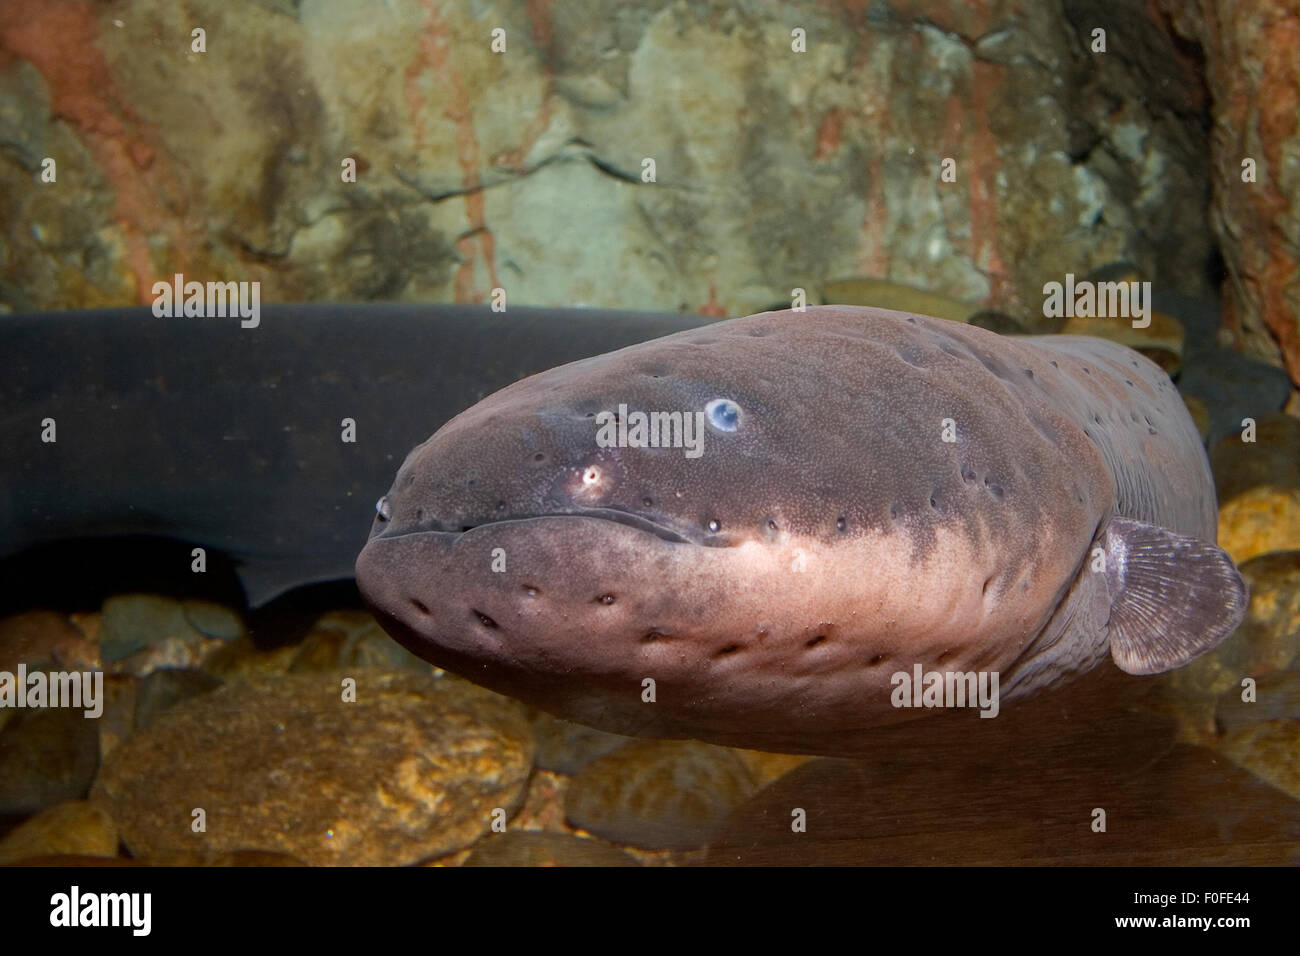 An Electric eel, Electrophorus electricus, from the Amazon River in Brazil Stock Photo